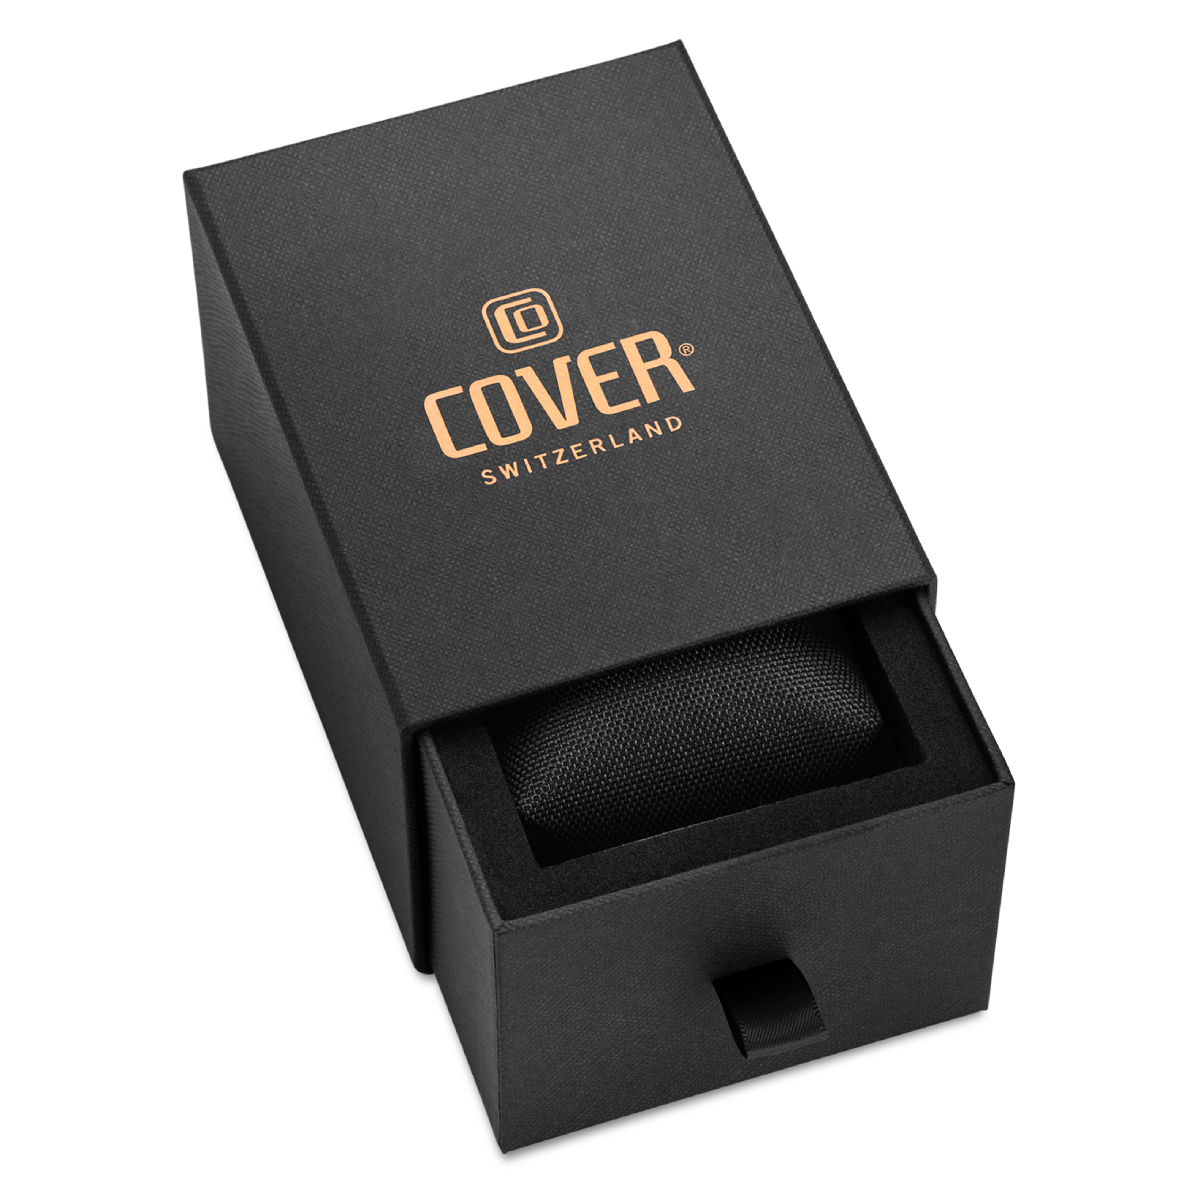 COVER Watch Box (Black_open)